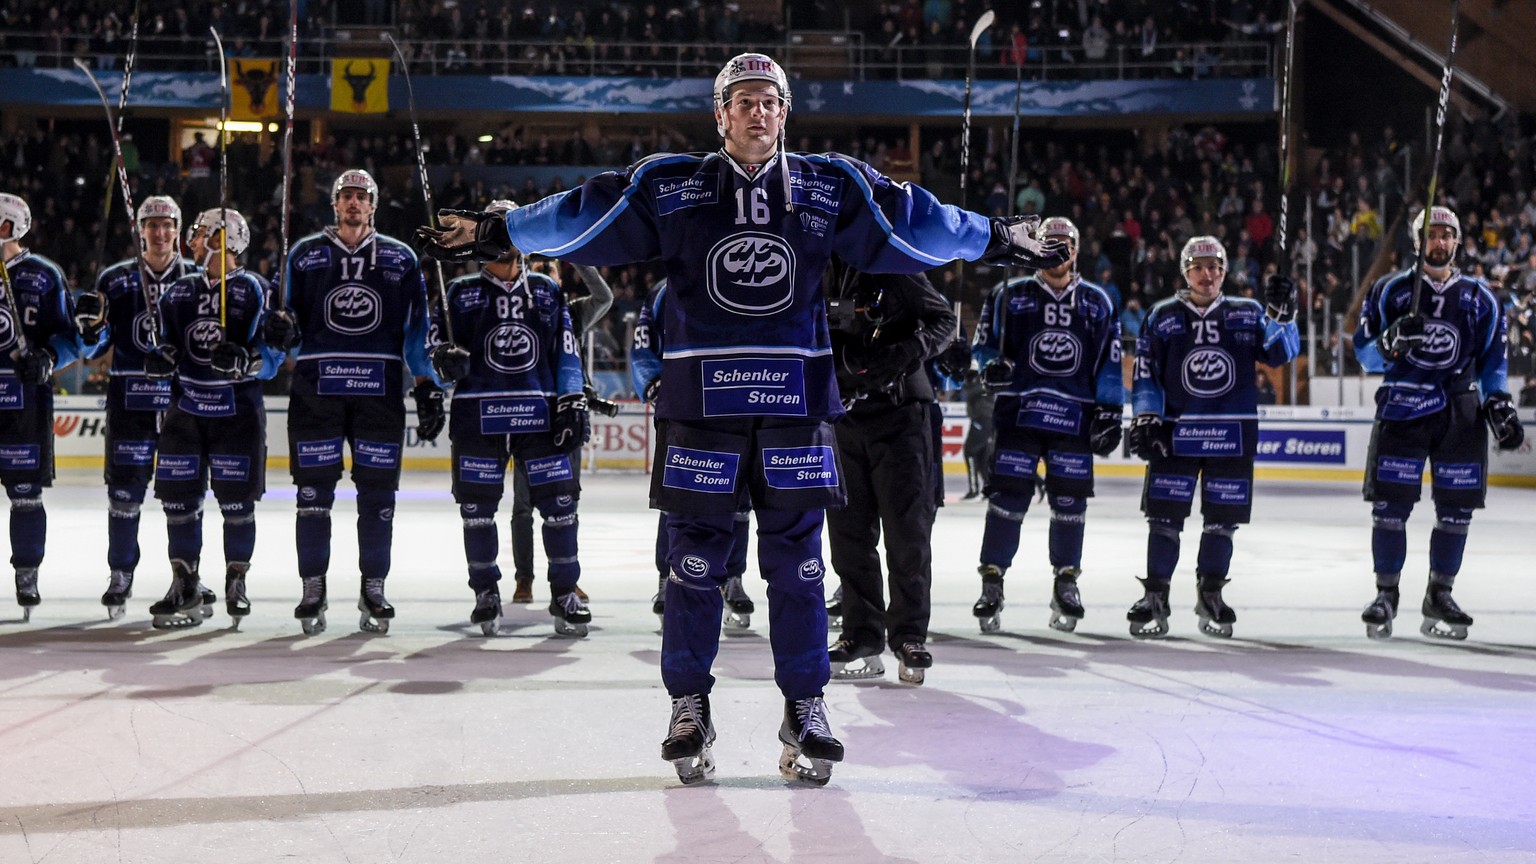 Ambri&#039;s Dominik Zwerger and the team after winning the game between HC Ambri-Piotta and TPS Turku, at the 93th Spengler Cup ice hockey tournament in Davos, Switzerland, Saturday, December 28, 201 ...